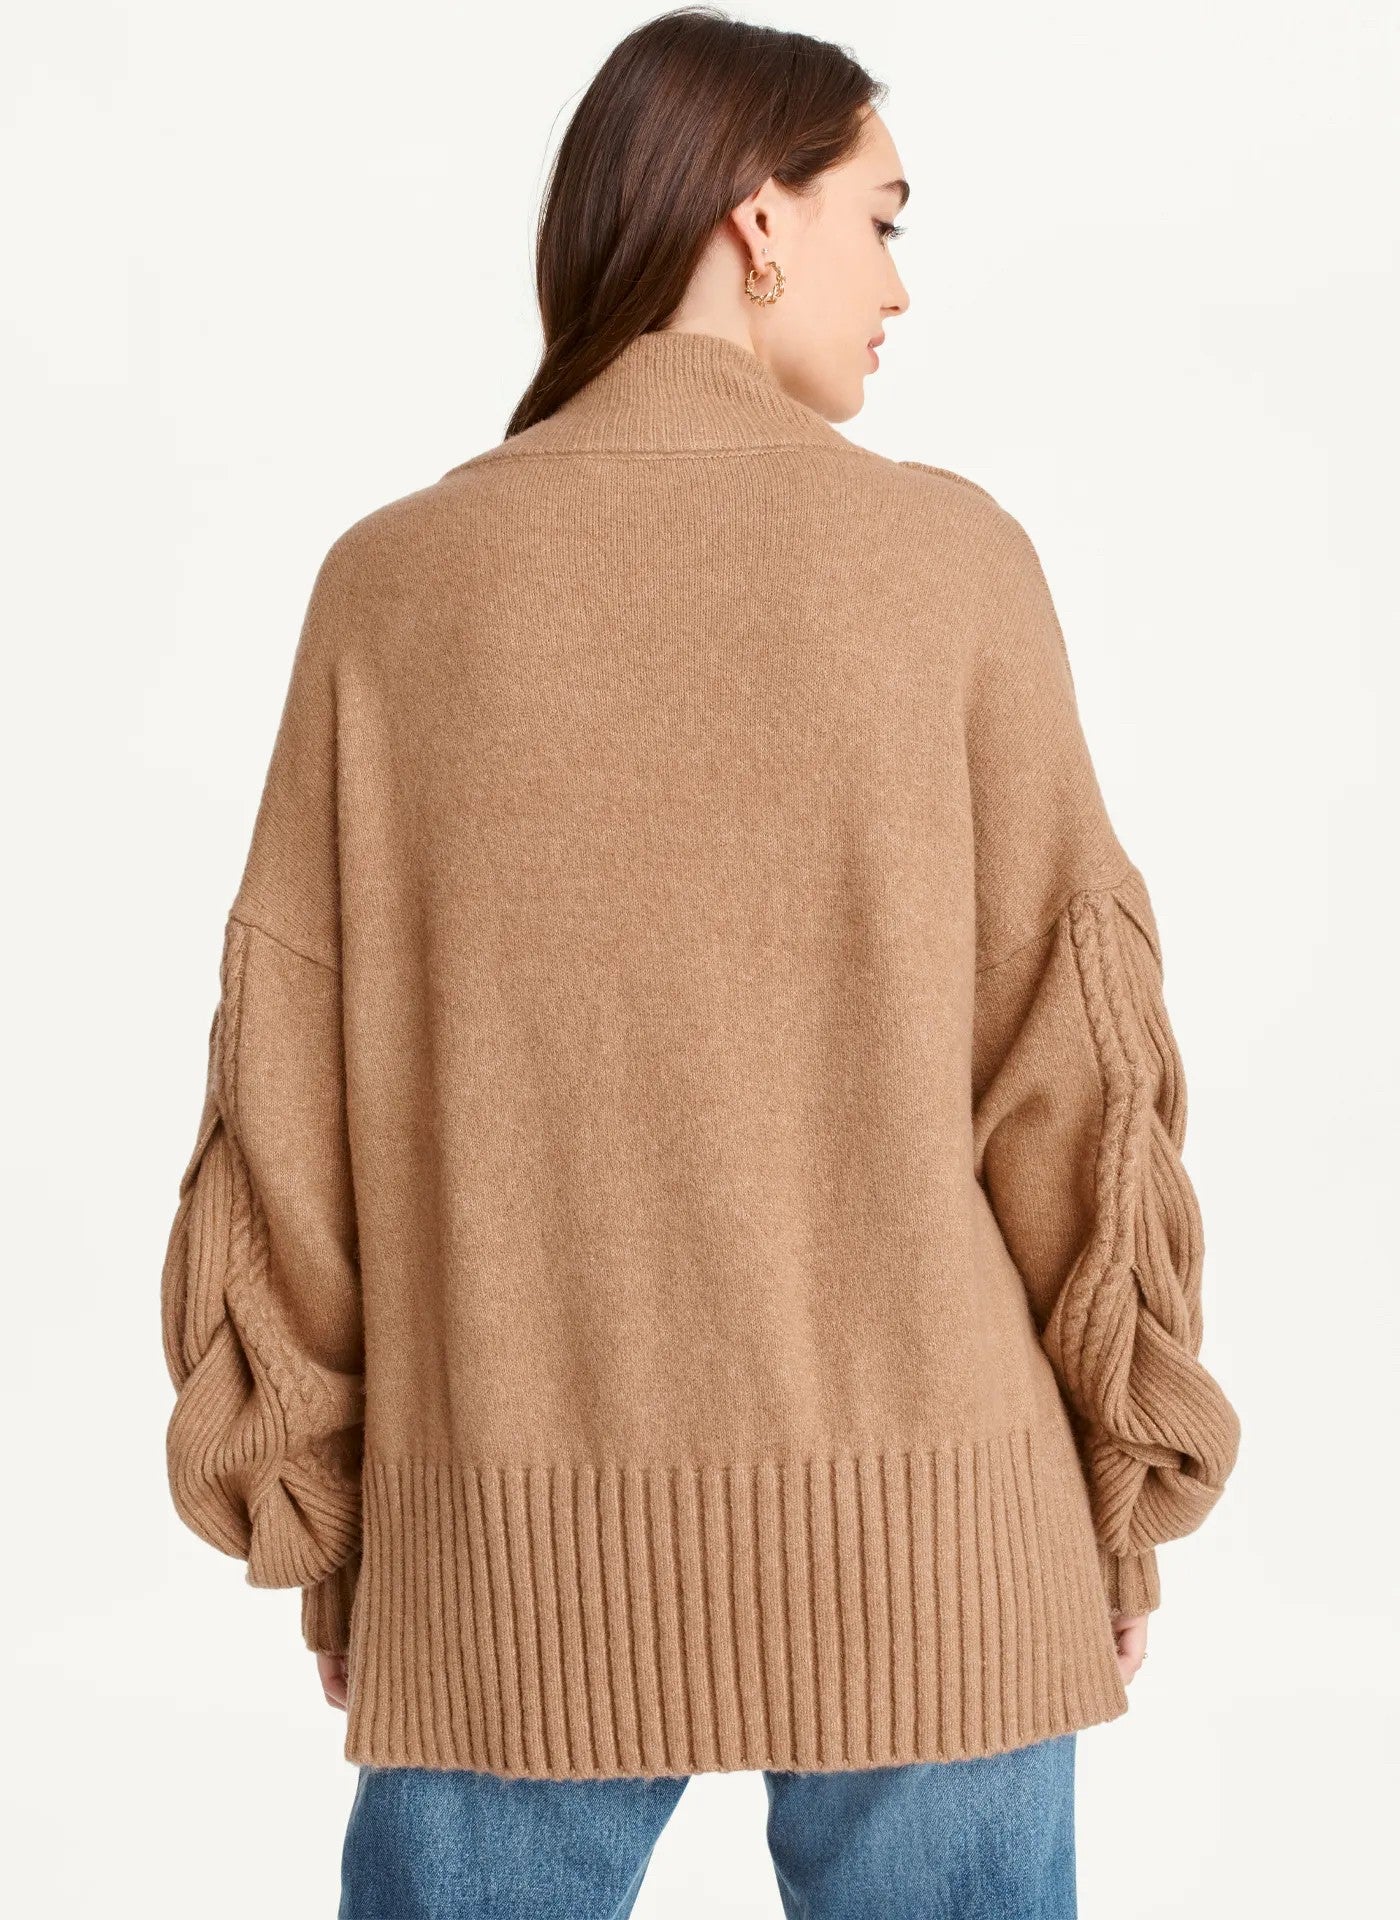 Braided Mock Neck High Low Sweater